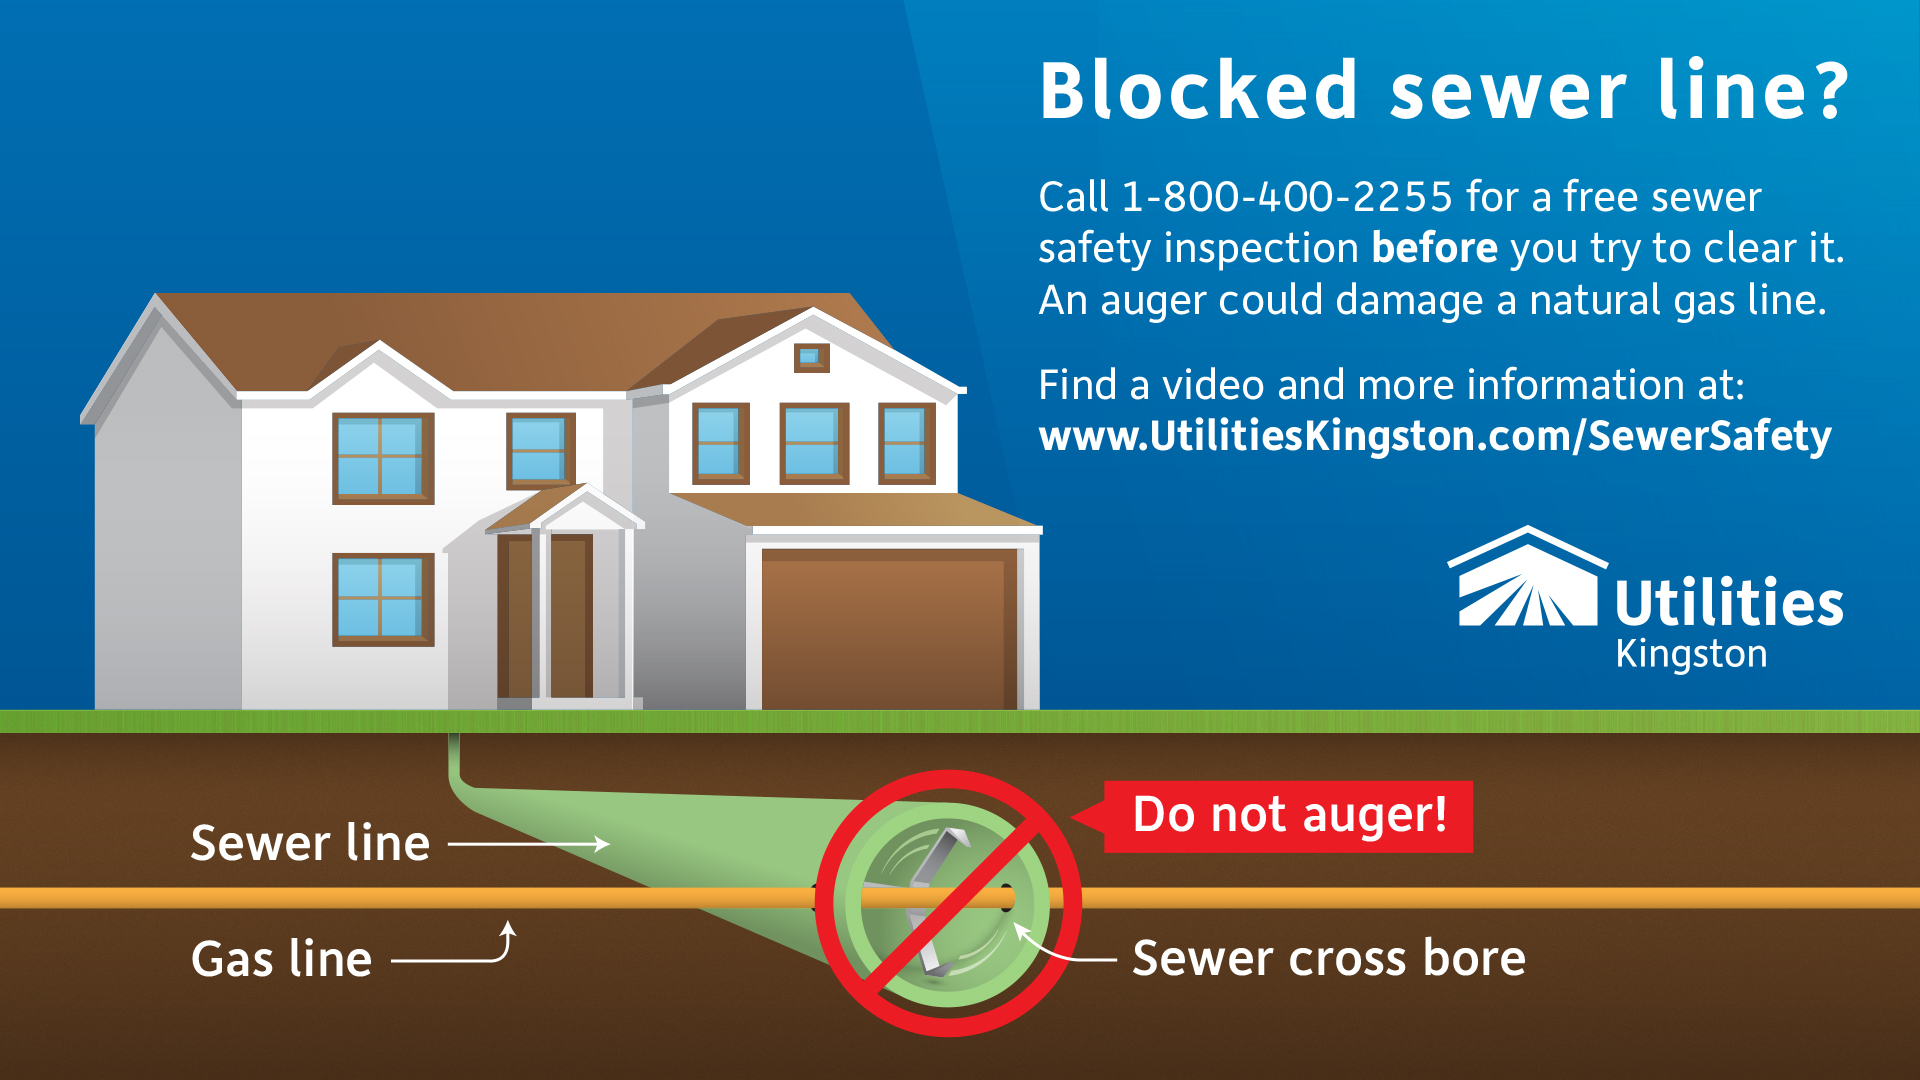 A drawing showing the dangers of augering a blocked sewer line. It encourages home owners to call for a free sewer safety inspection first, at 1-800-400-2255.